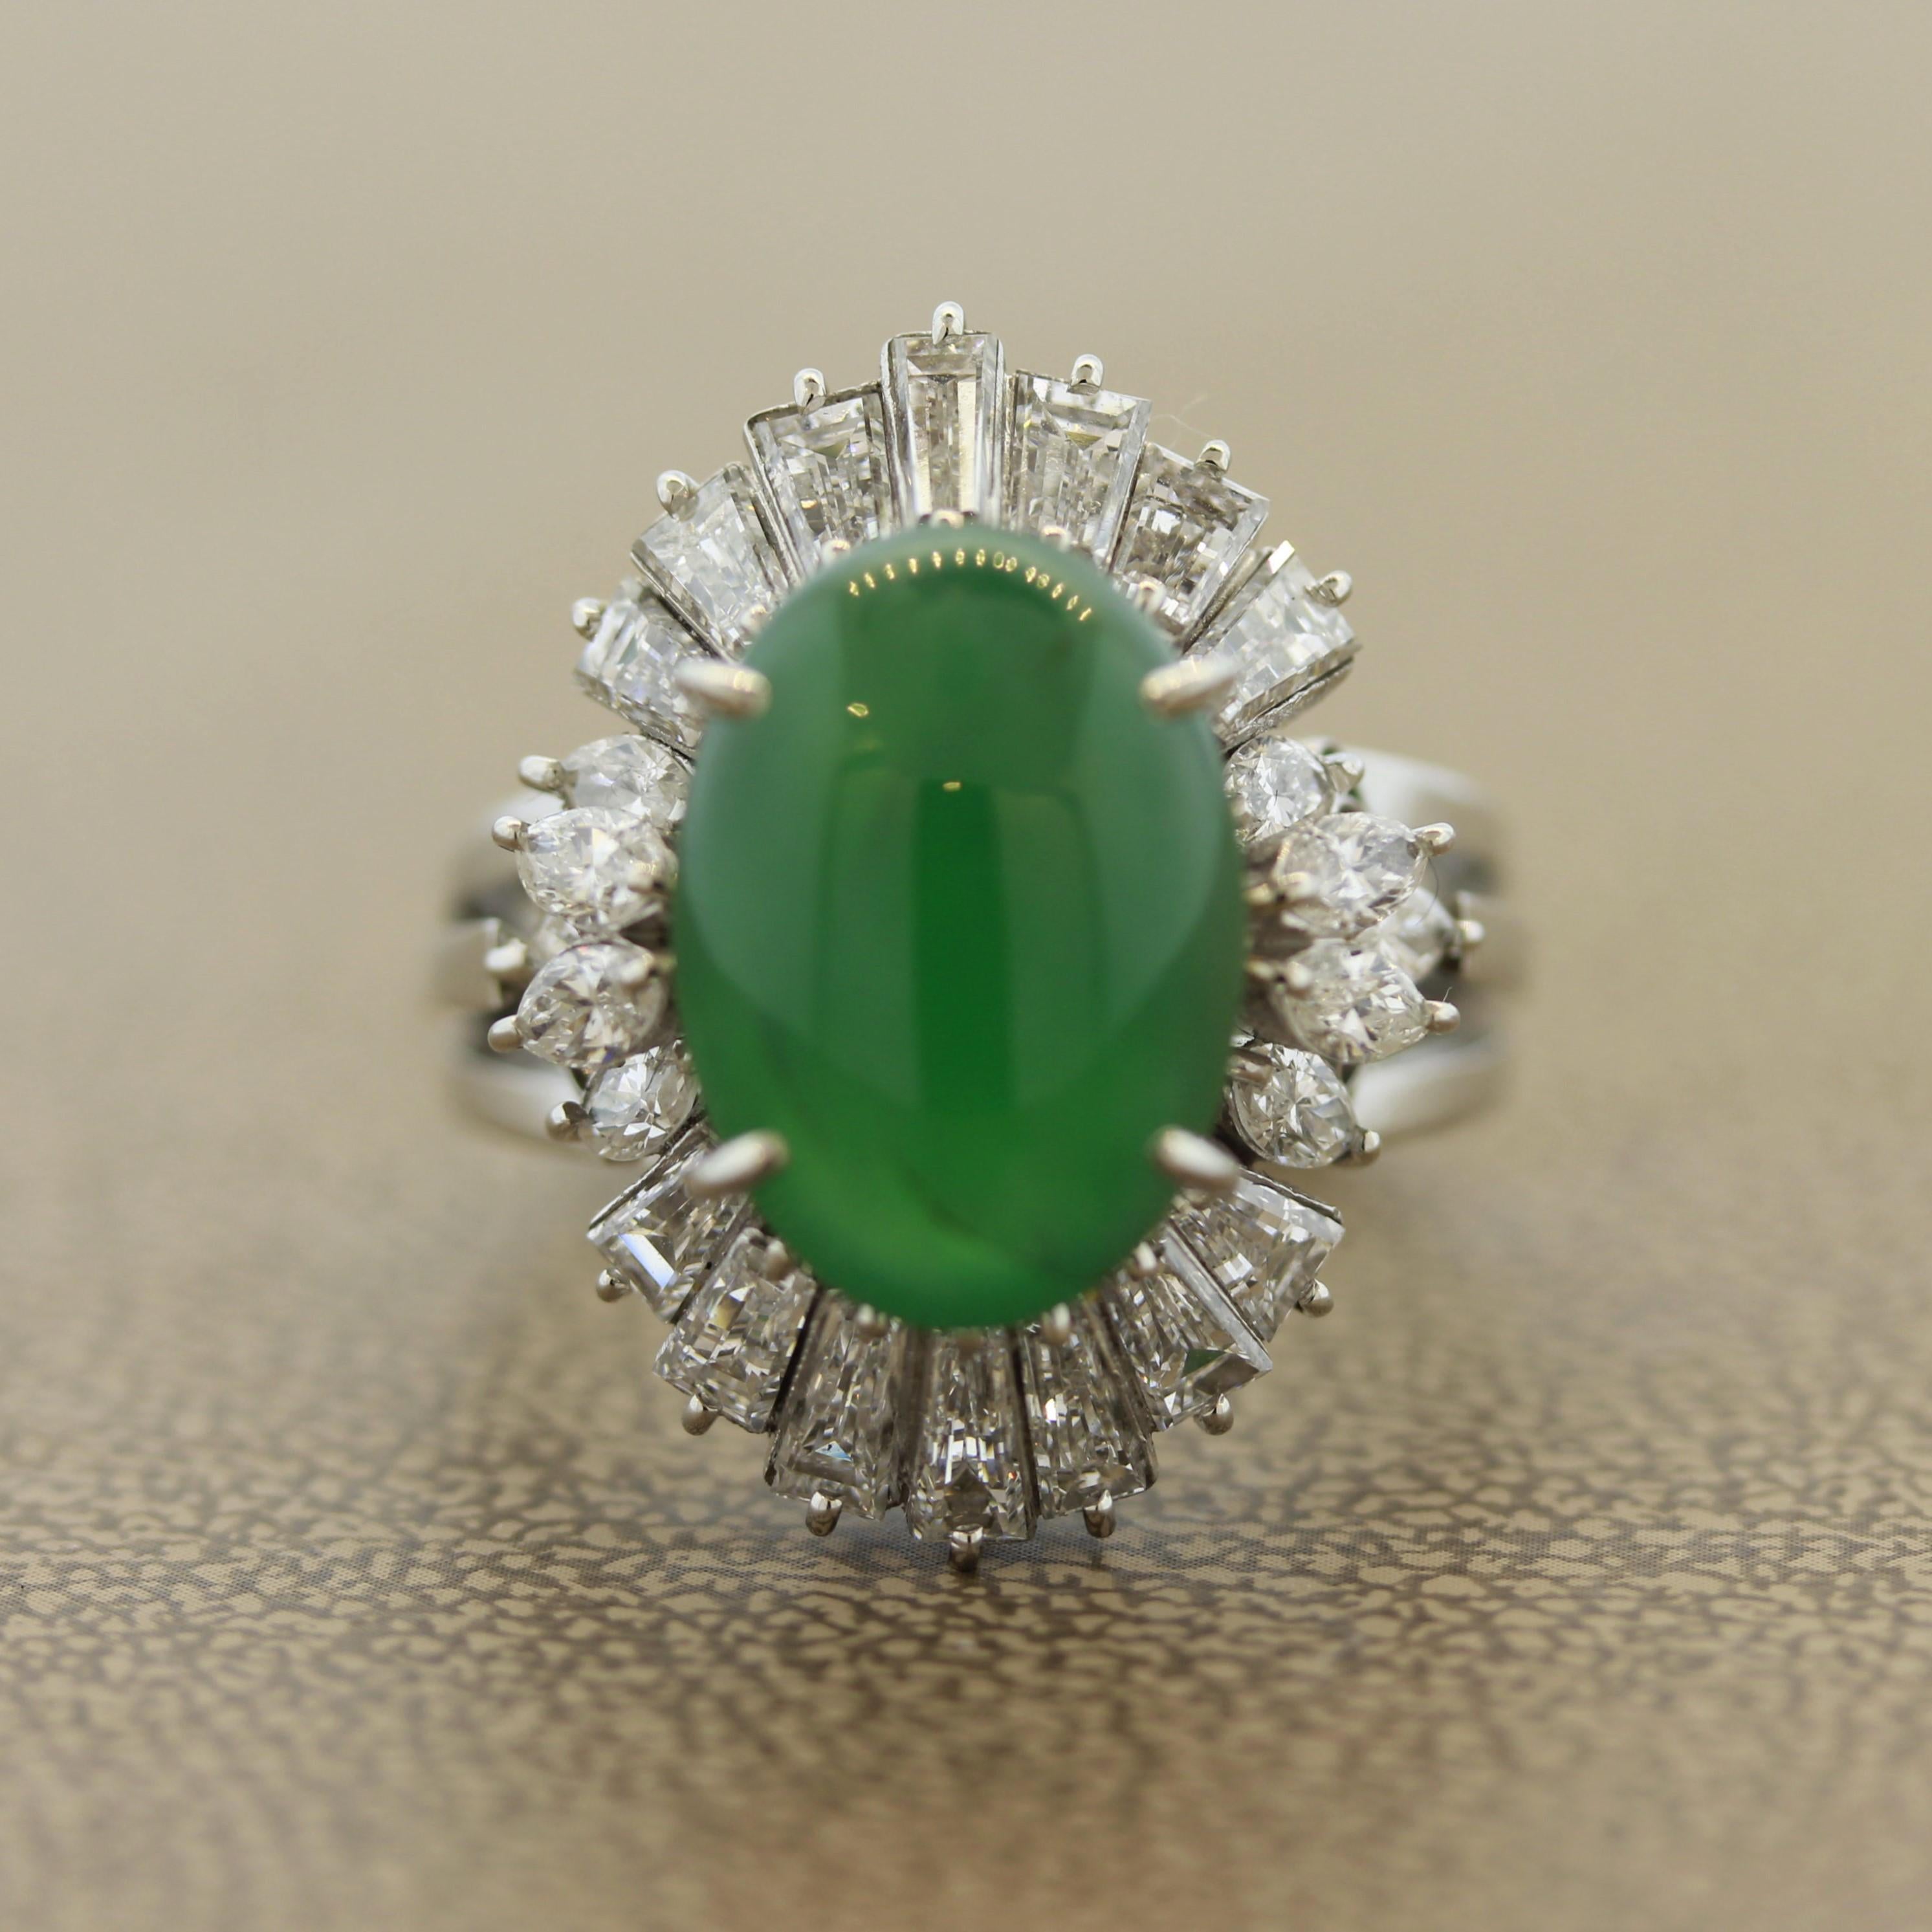 A spectacular piece of natural jadeite jade takes center stage of this cocktail ring. It has a bright apple green color and a glossy luster that rolls light softly across its face. It is complemented by pear shape and tapered baguette cut diamonds